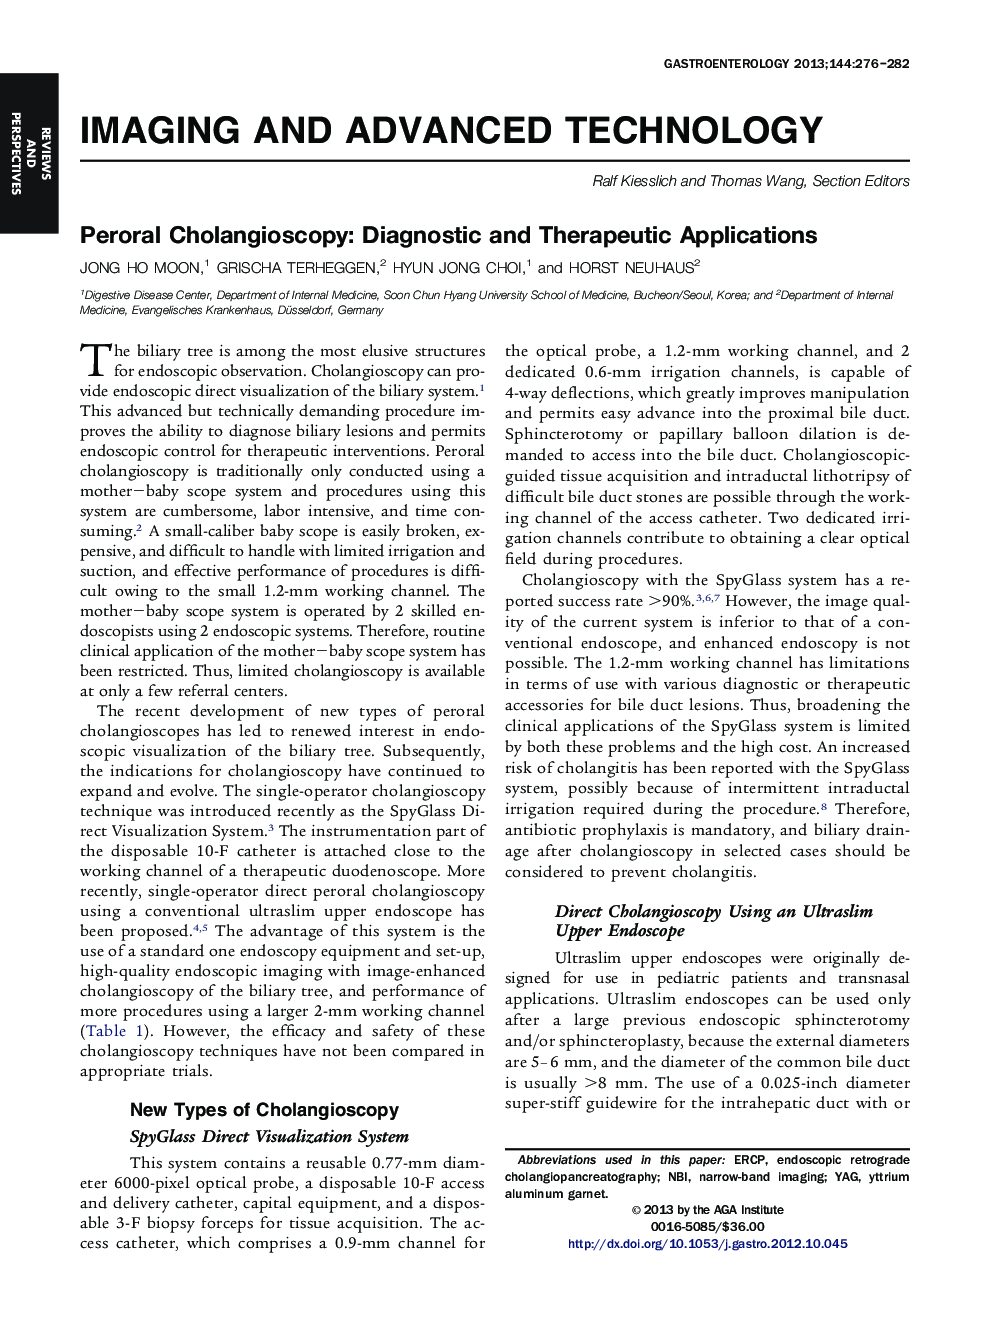 Peroral Cholangioscopy: Diagnostic and Therapeutic Applications